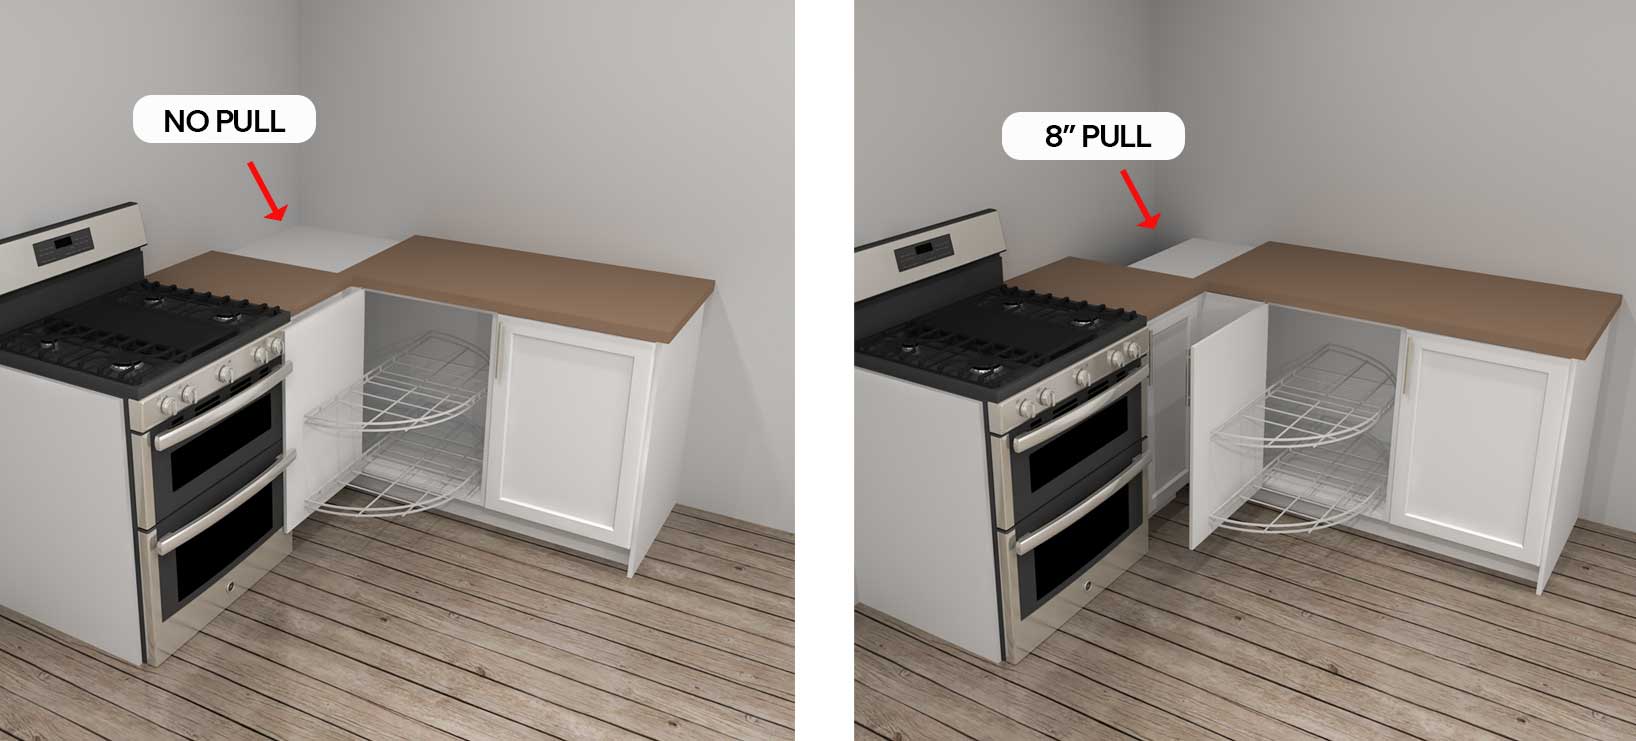 how a corner cabinet and accessory opens with no pull vs. 8” of pull